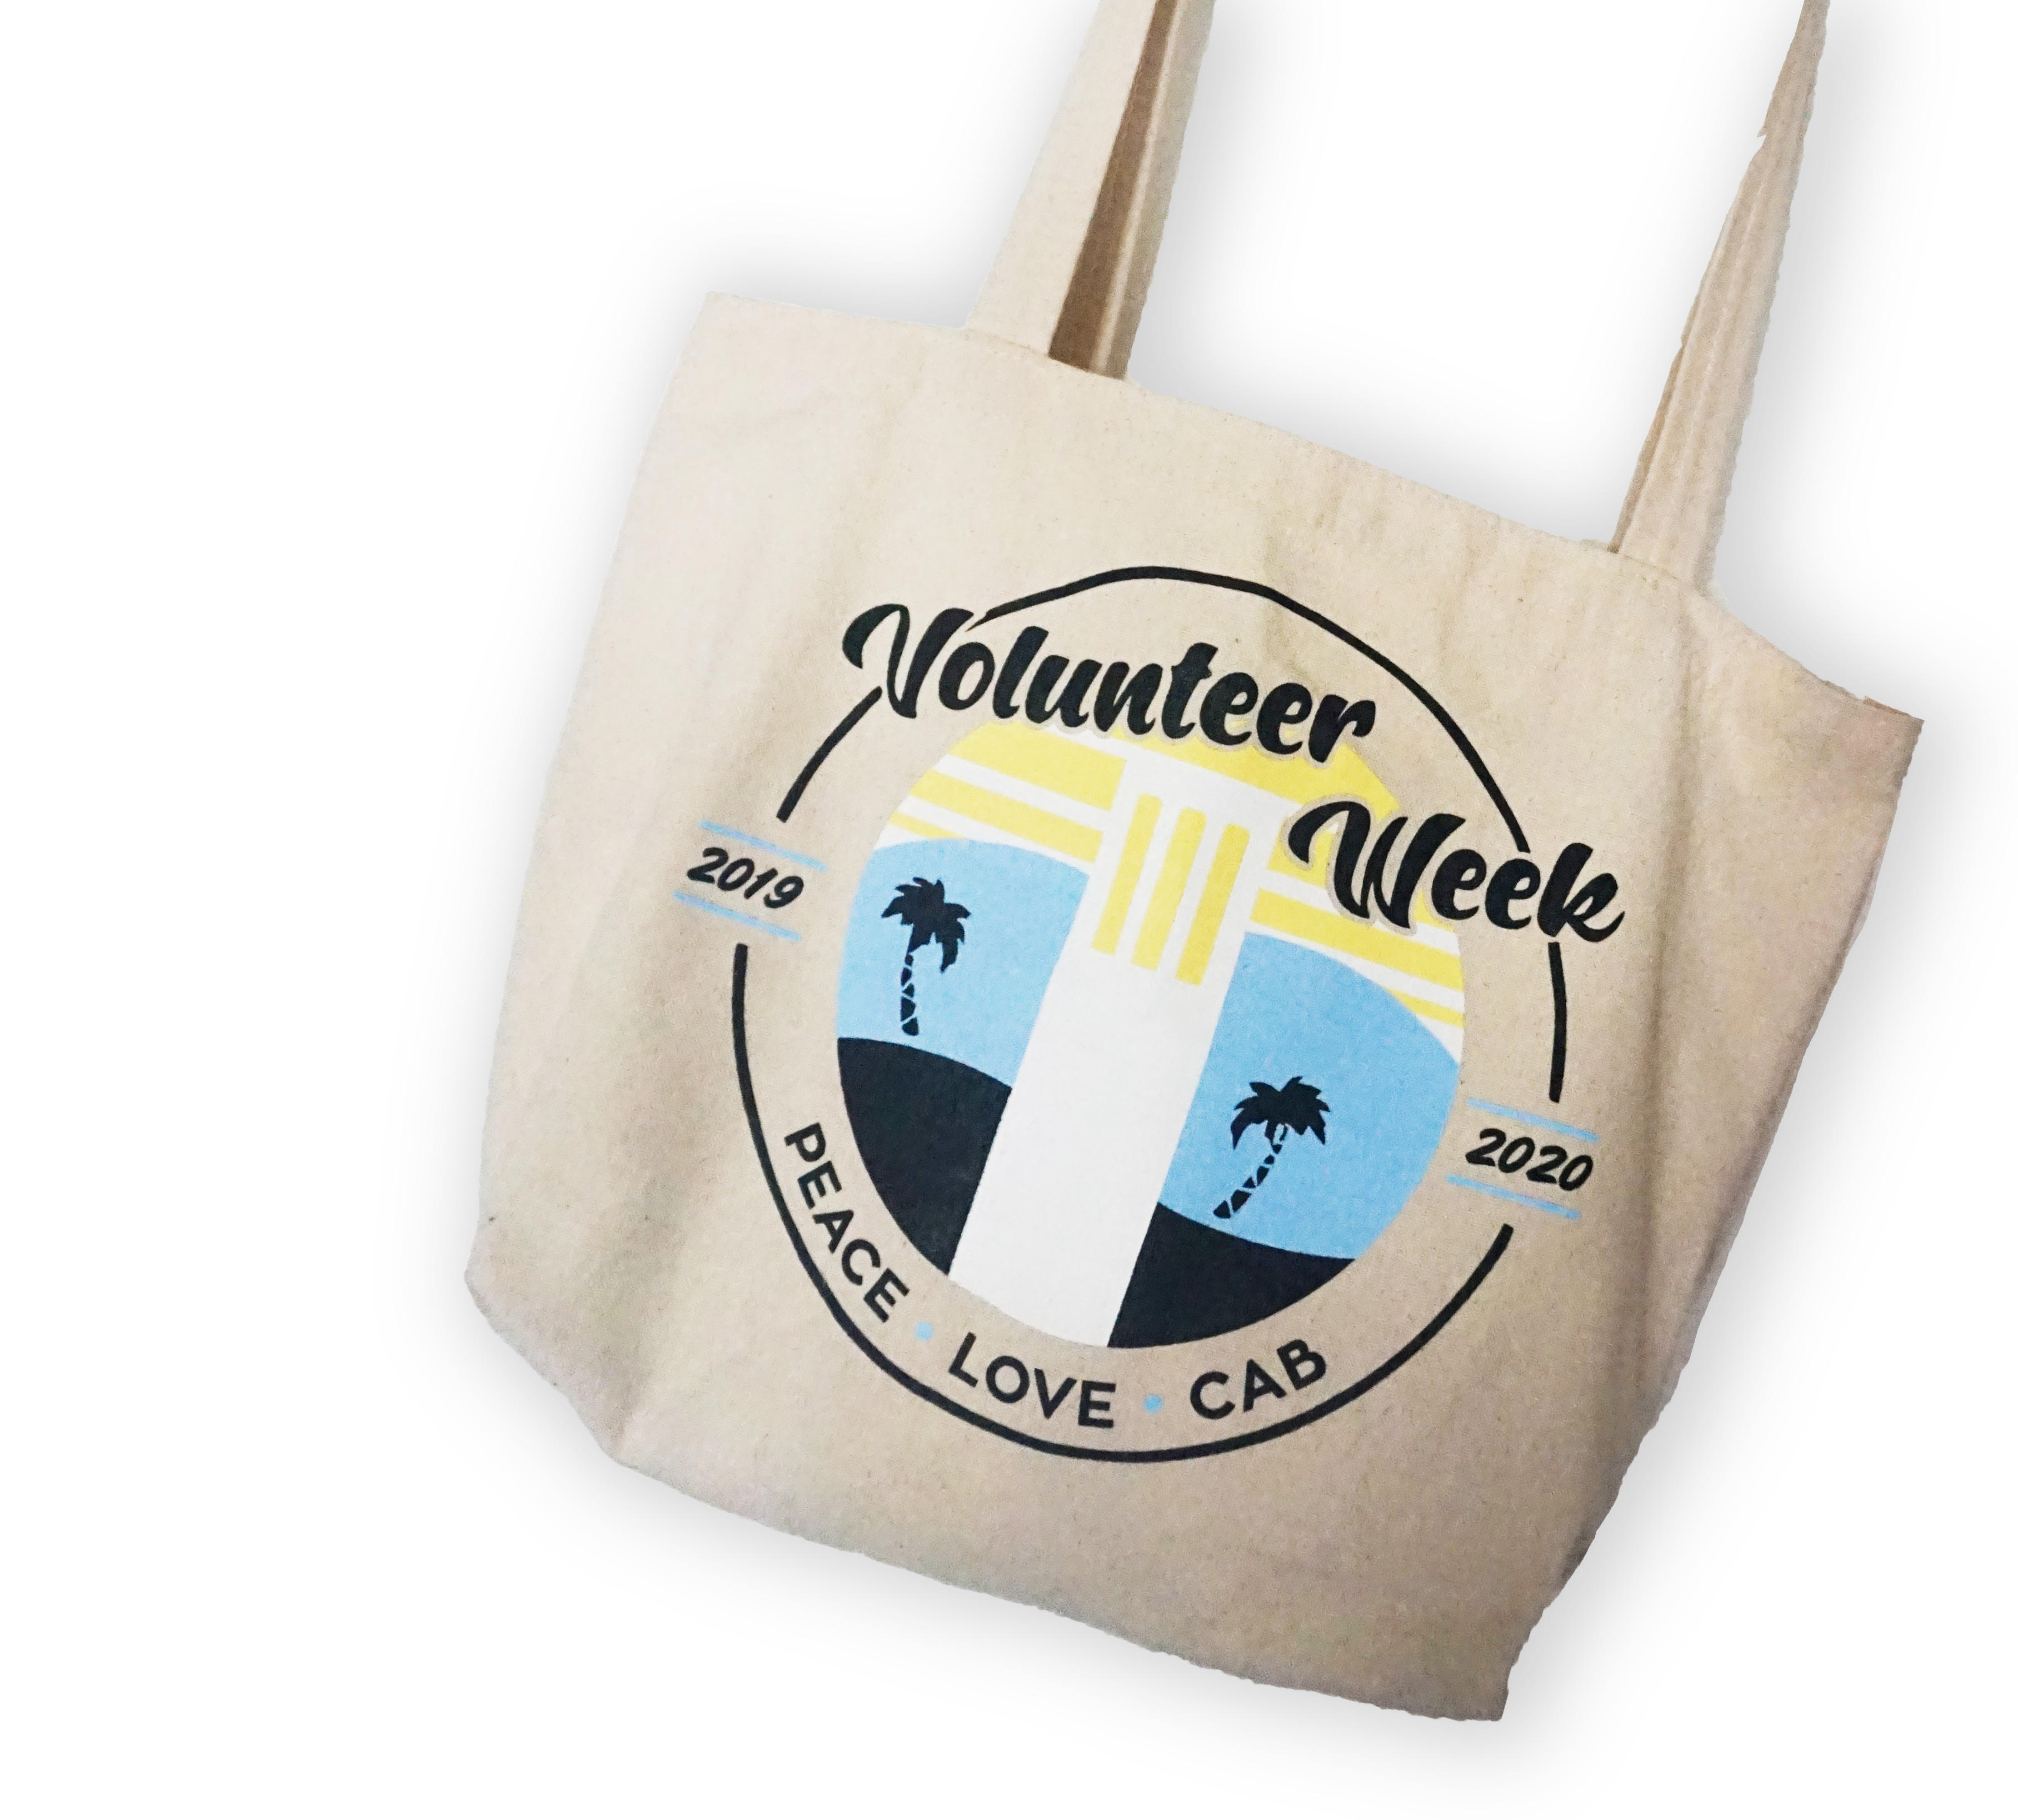 A cream colored tote bag with a graphic of Storke Tower and palm trees, with 'Volunteer Week' printed across the top